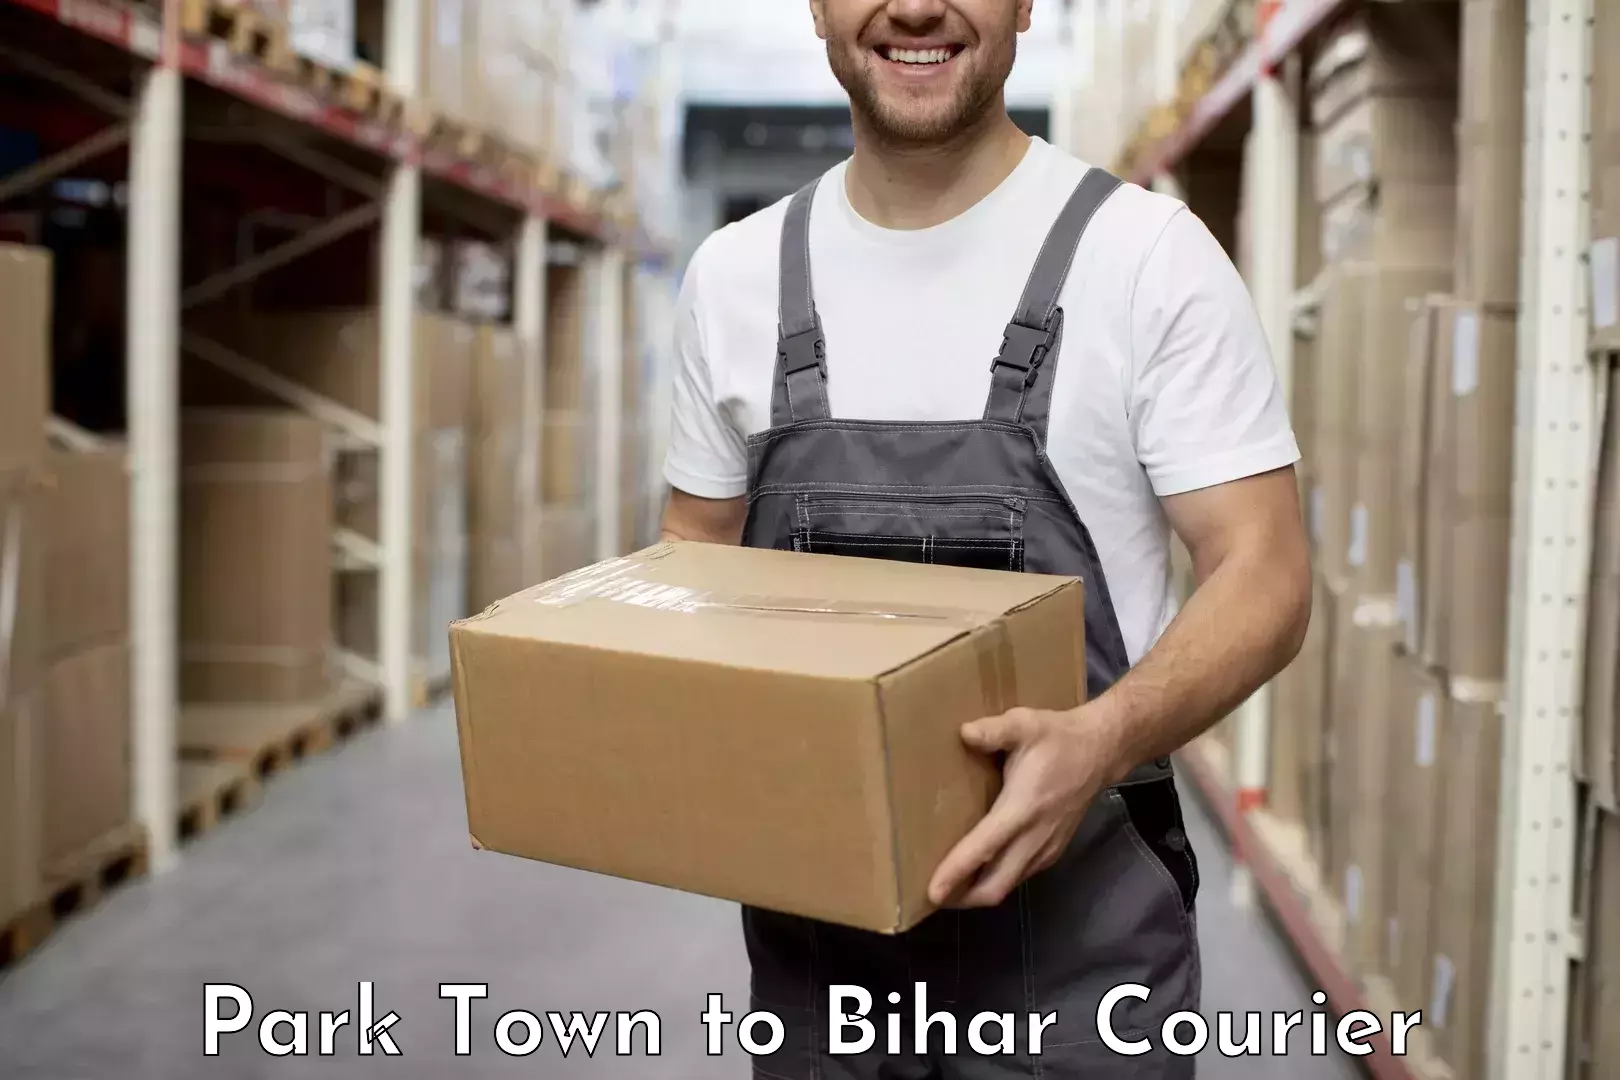 Medical delivery services Park Town to Bihar